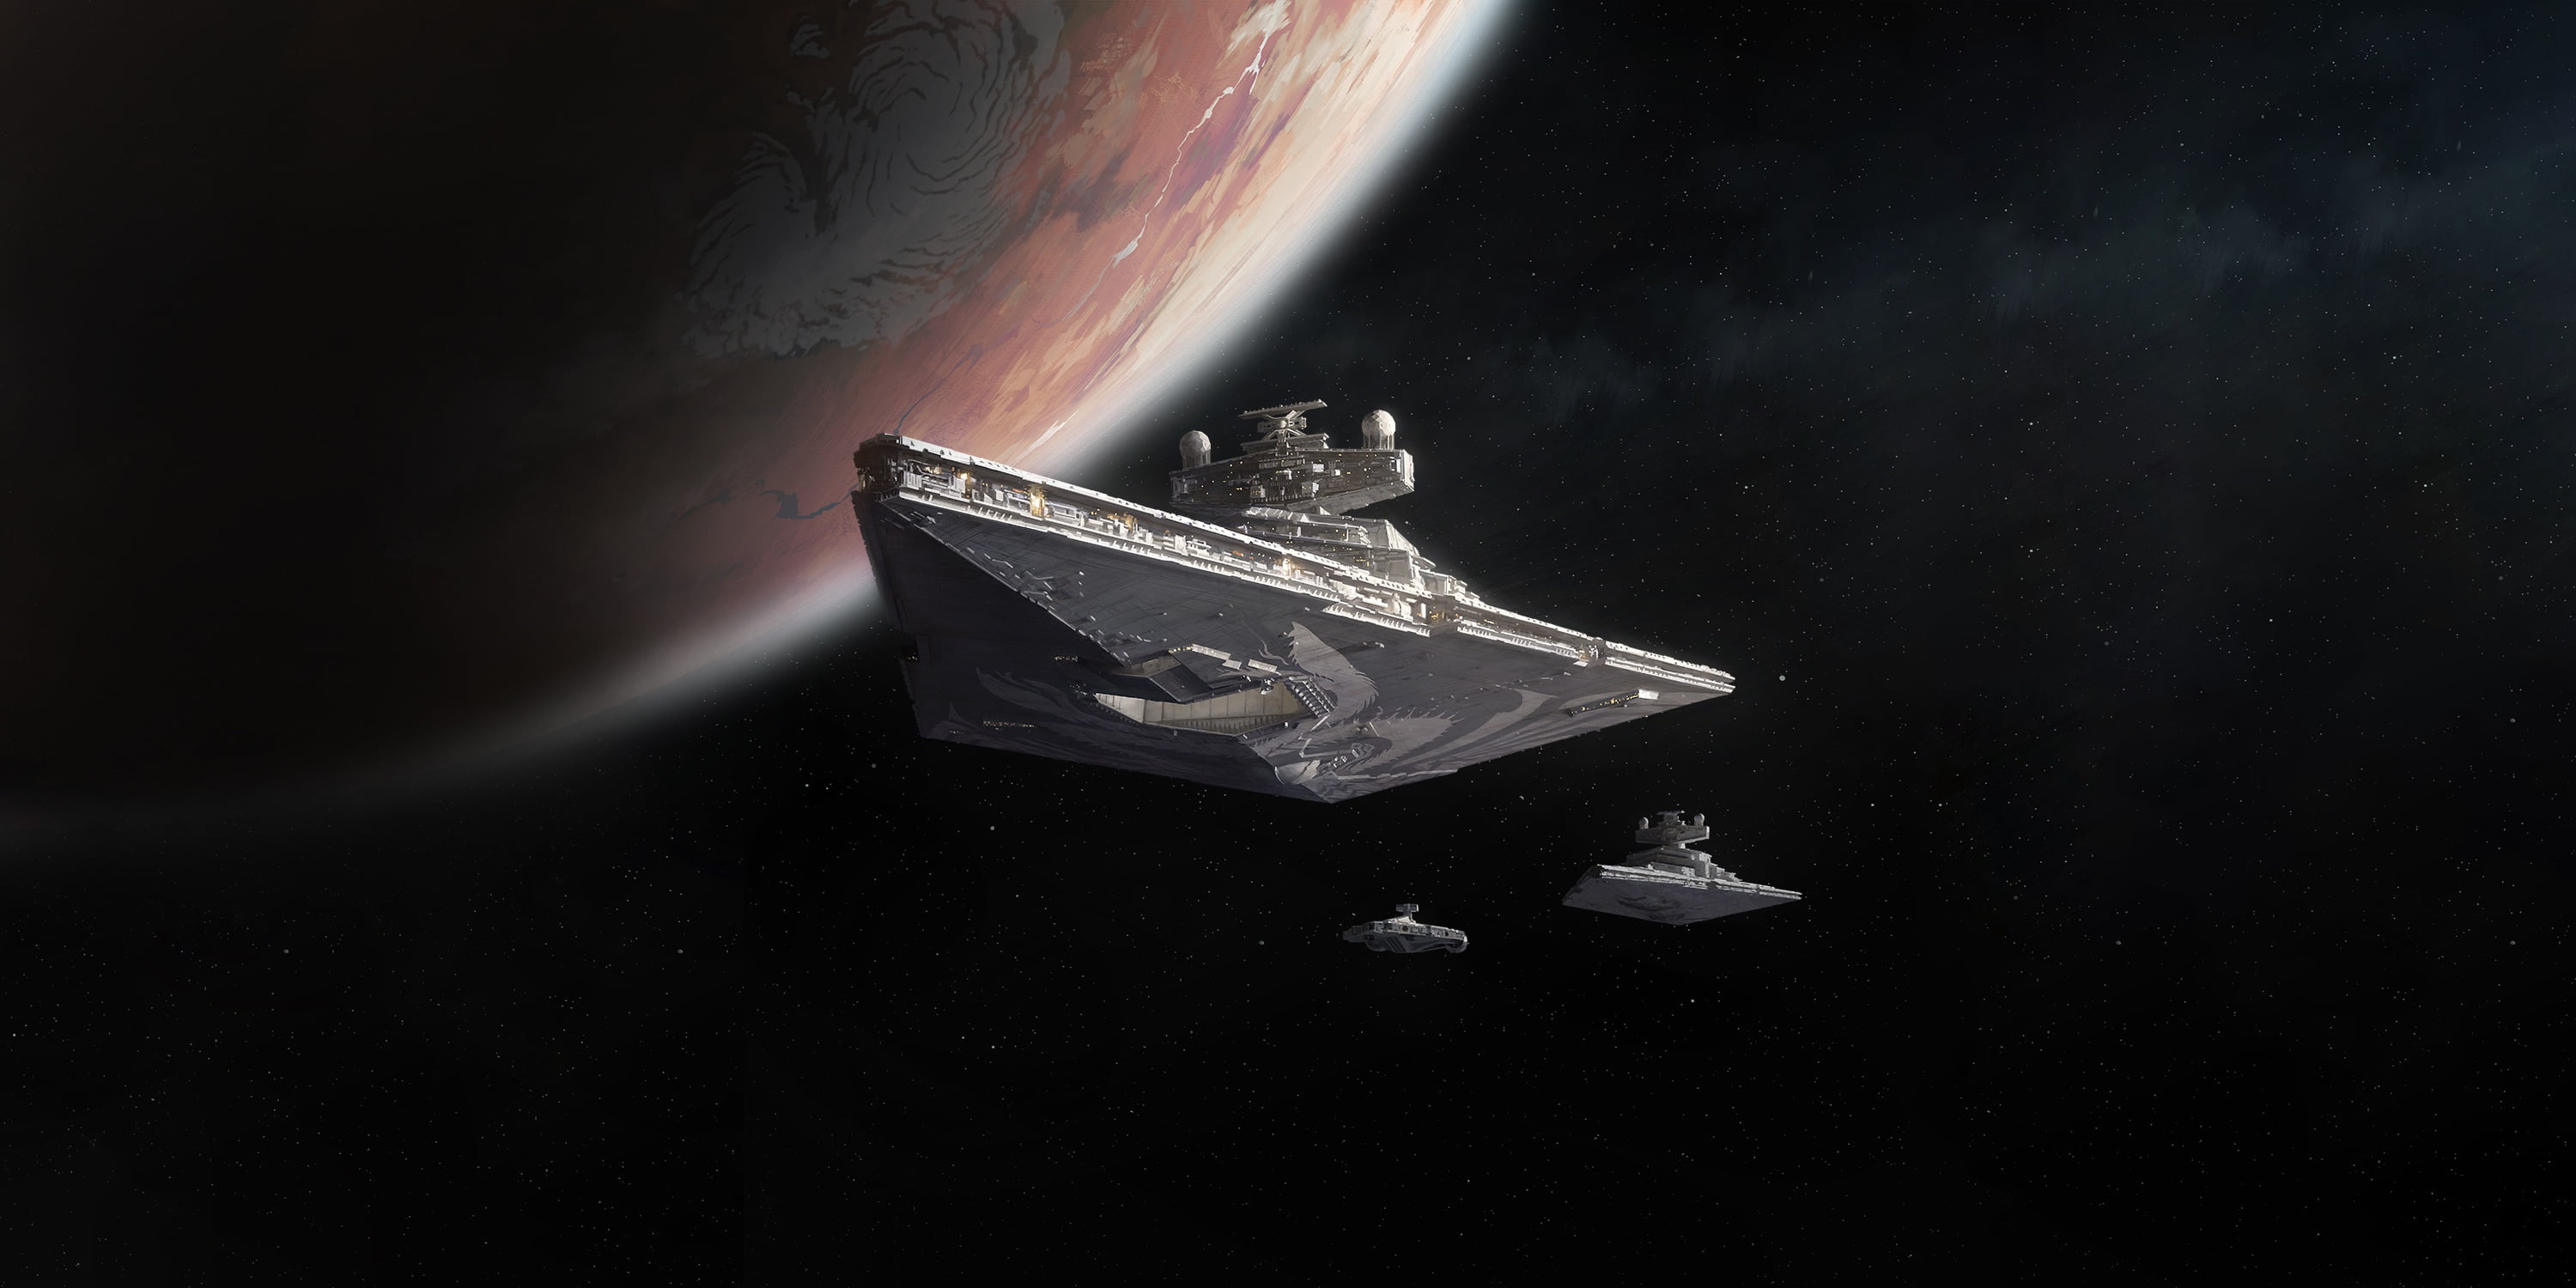 Star Wars, Imperial Forces, science fiction, spaceship, Star Wars Ships